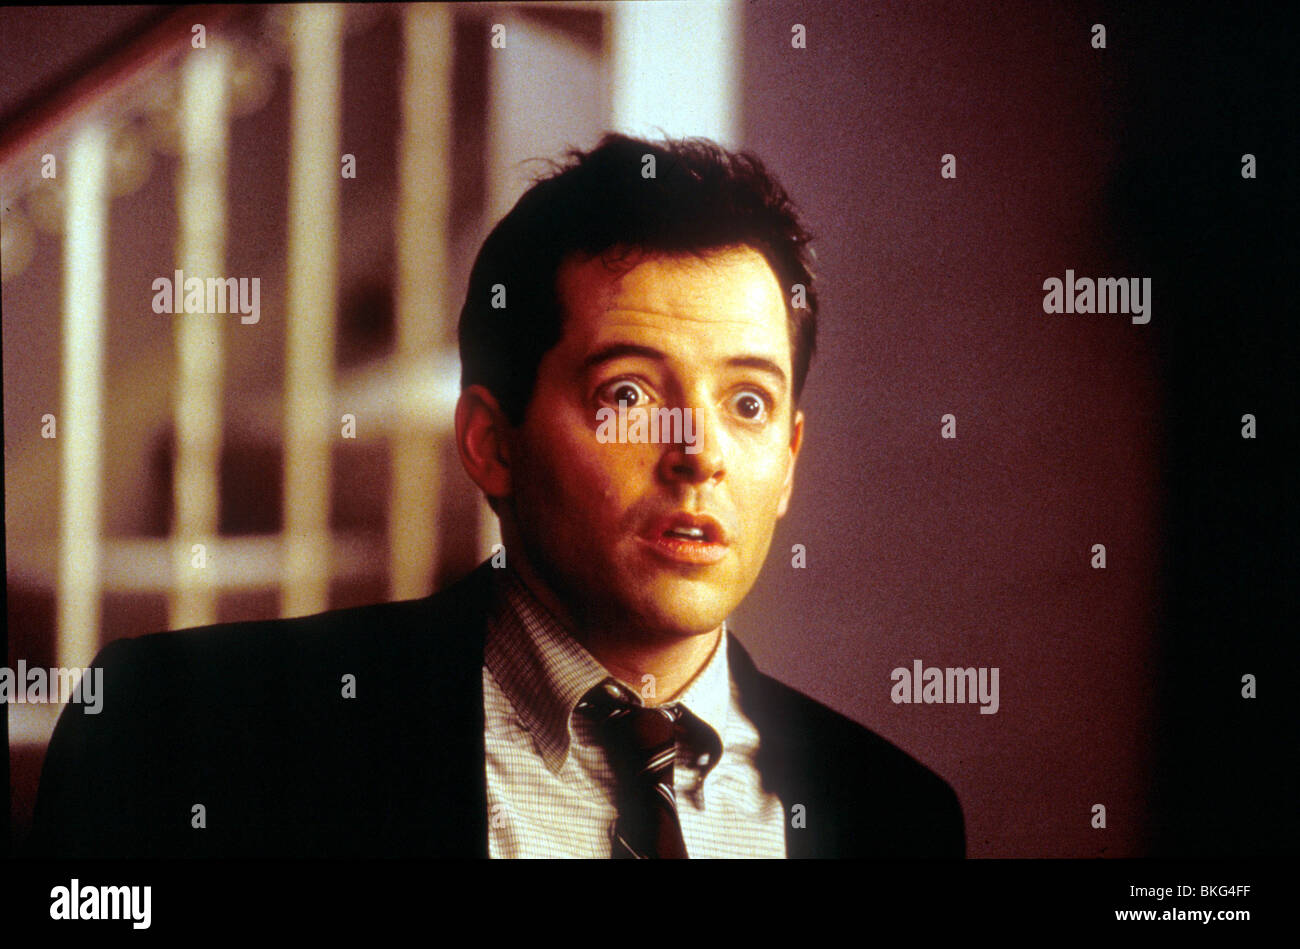 THE CABLE GUY (1996) MATTHEW BRODERICK CABG 112 Stock Photo